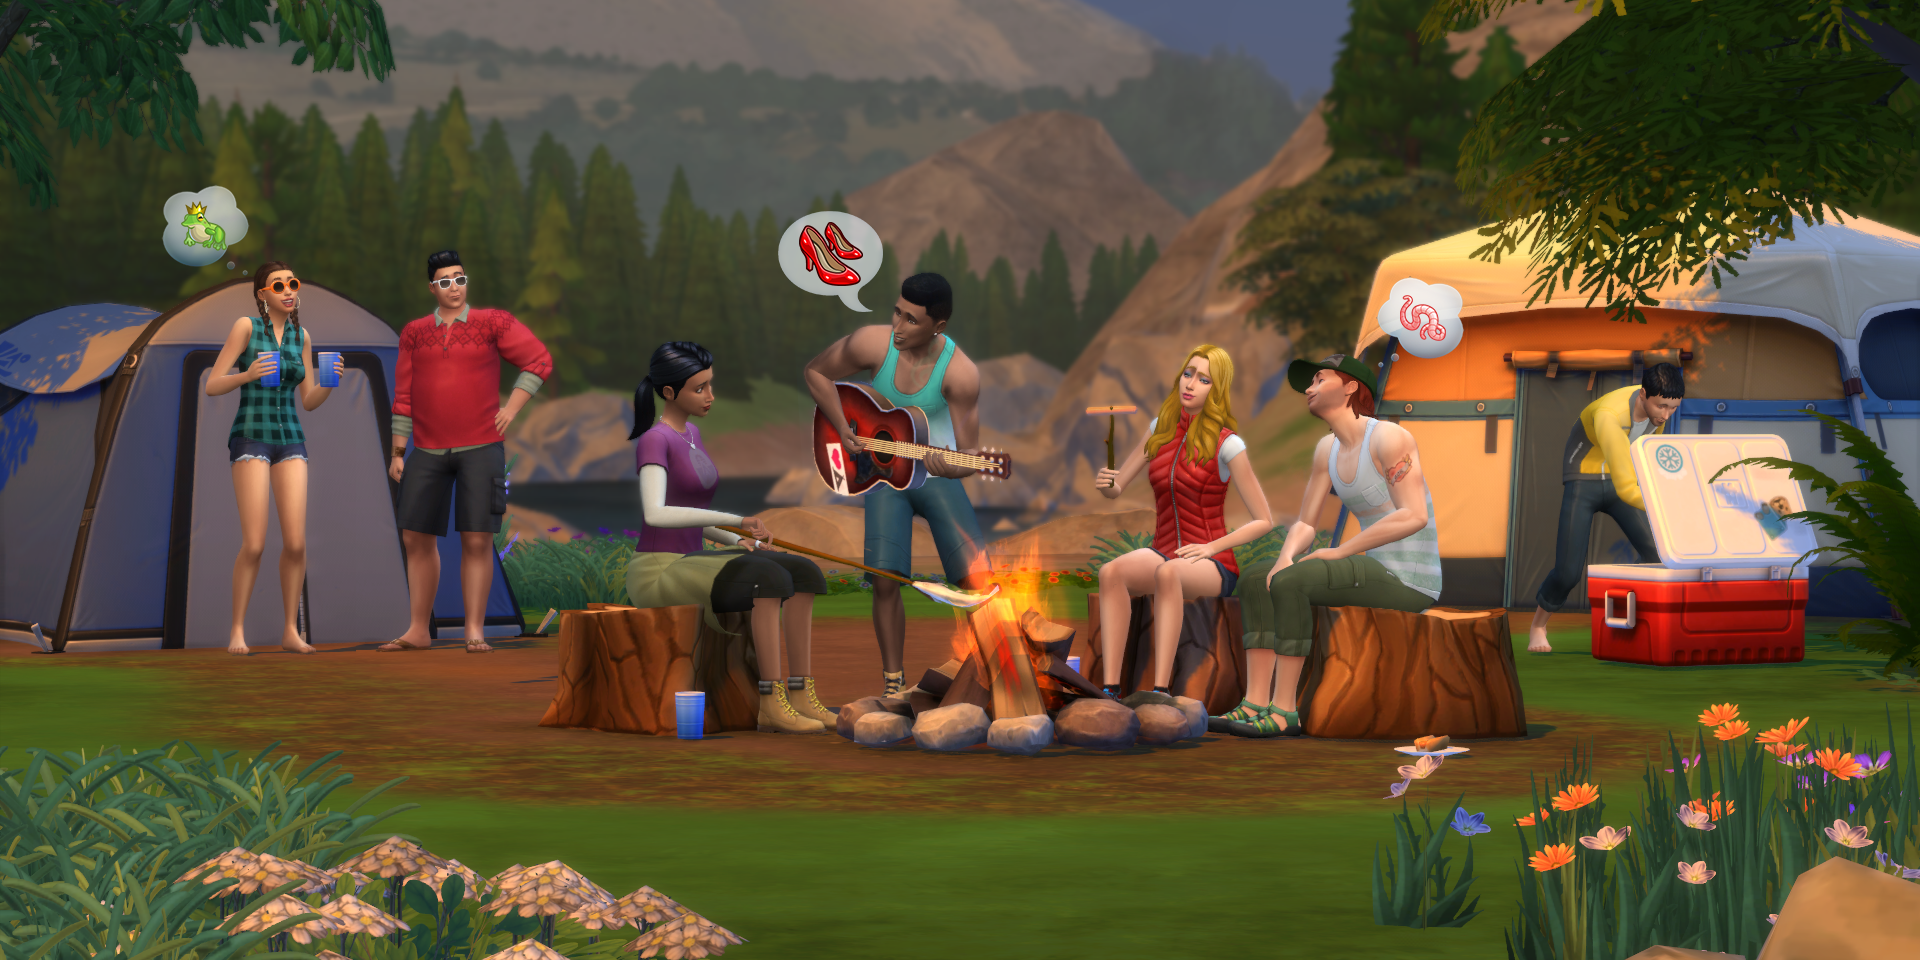 A group of Sims enjoy a camping trip at Granite Falls, playing guitar and staying warm by a campfire